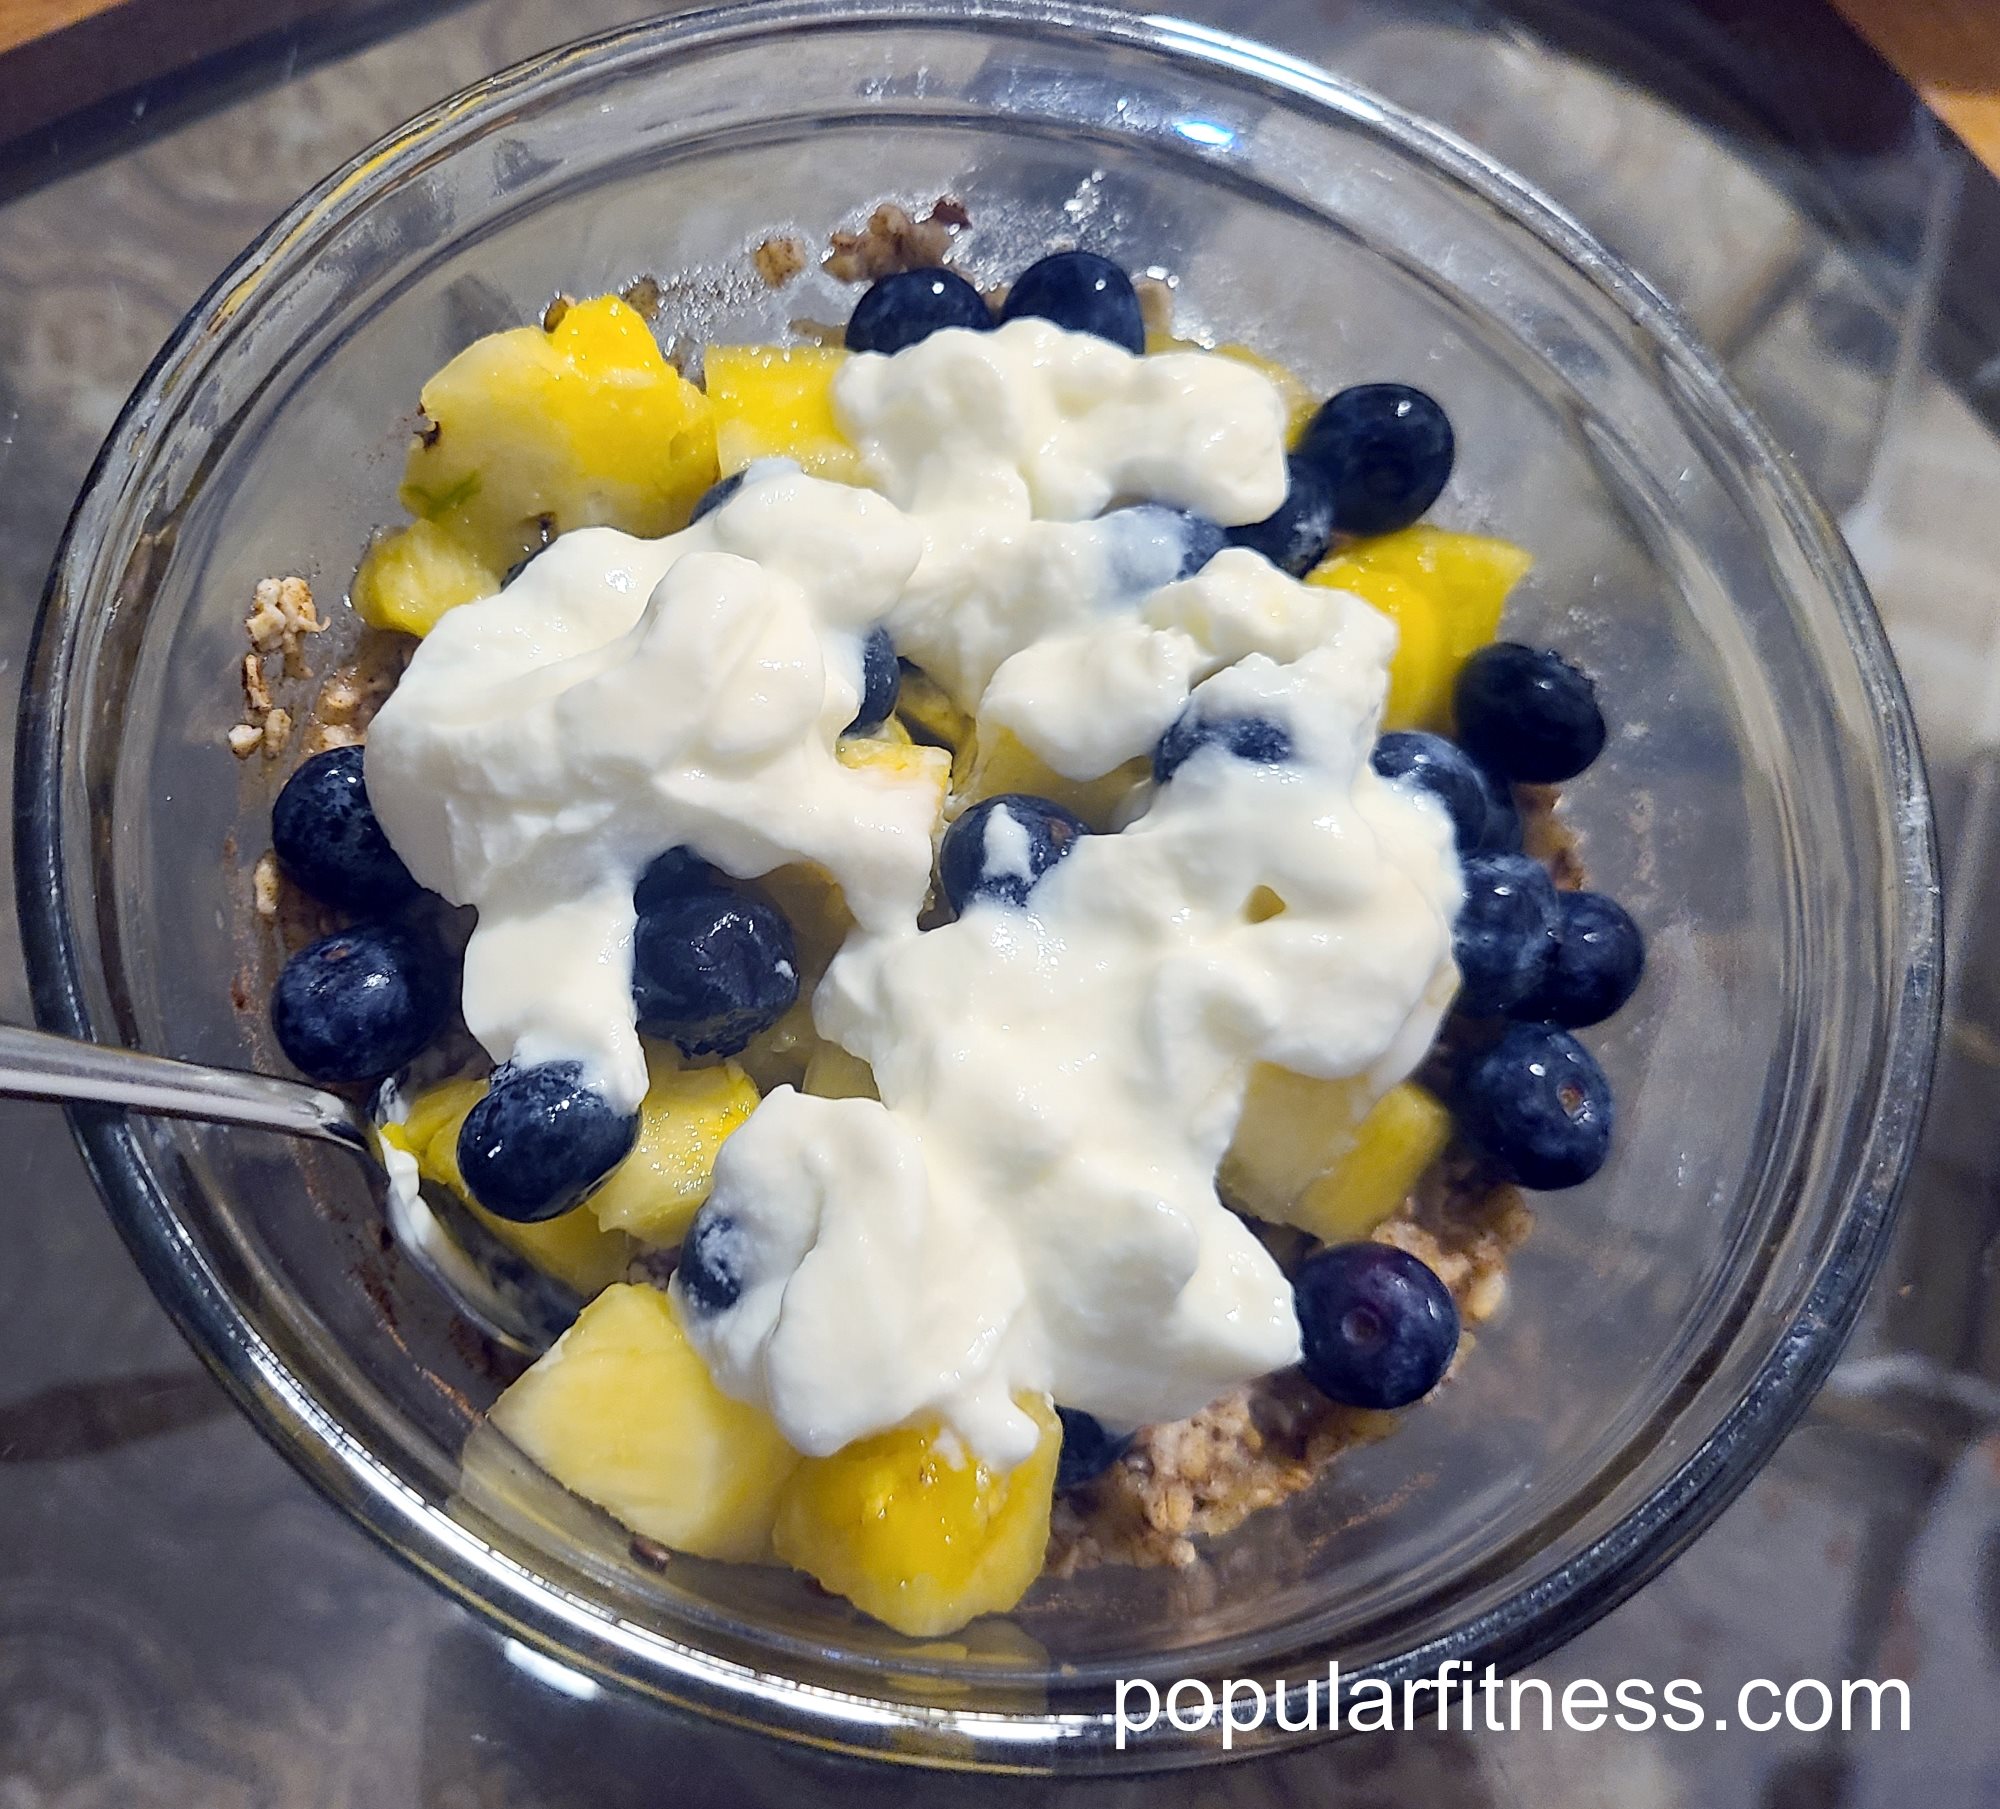 Healthy oatmeal breakfast with 3 fruites,flax seeds, milk, probiotic yoghurt - Photo by popular fitness